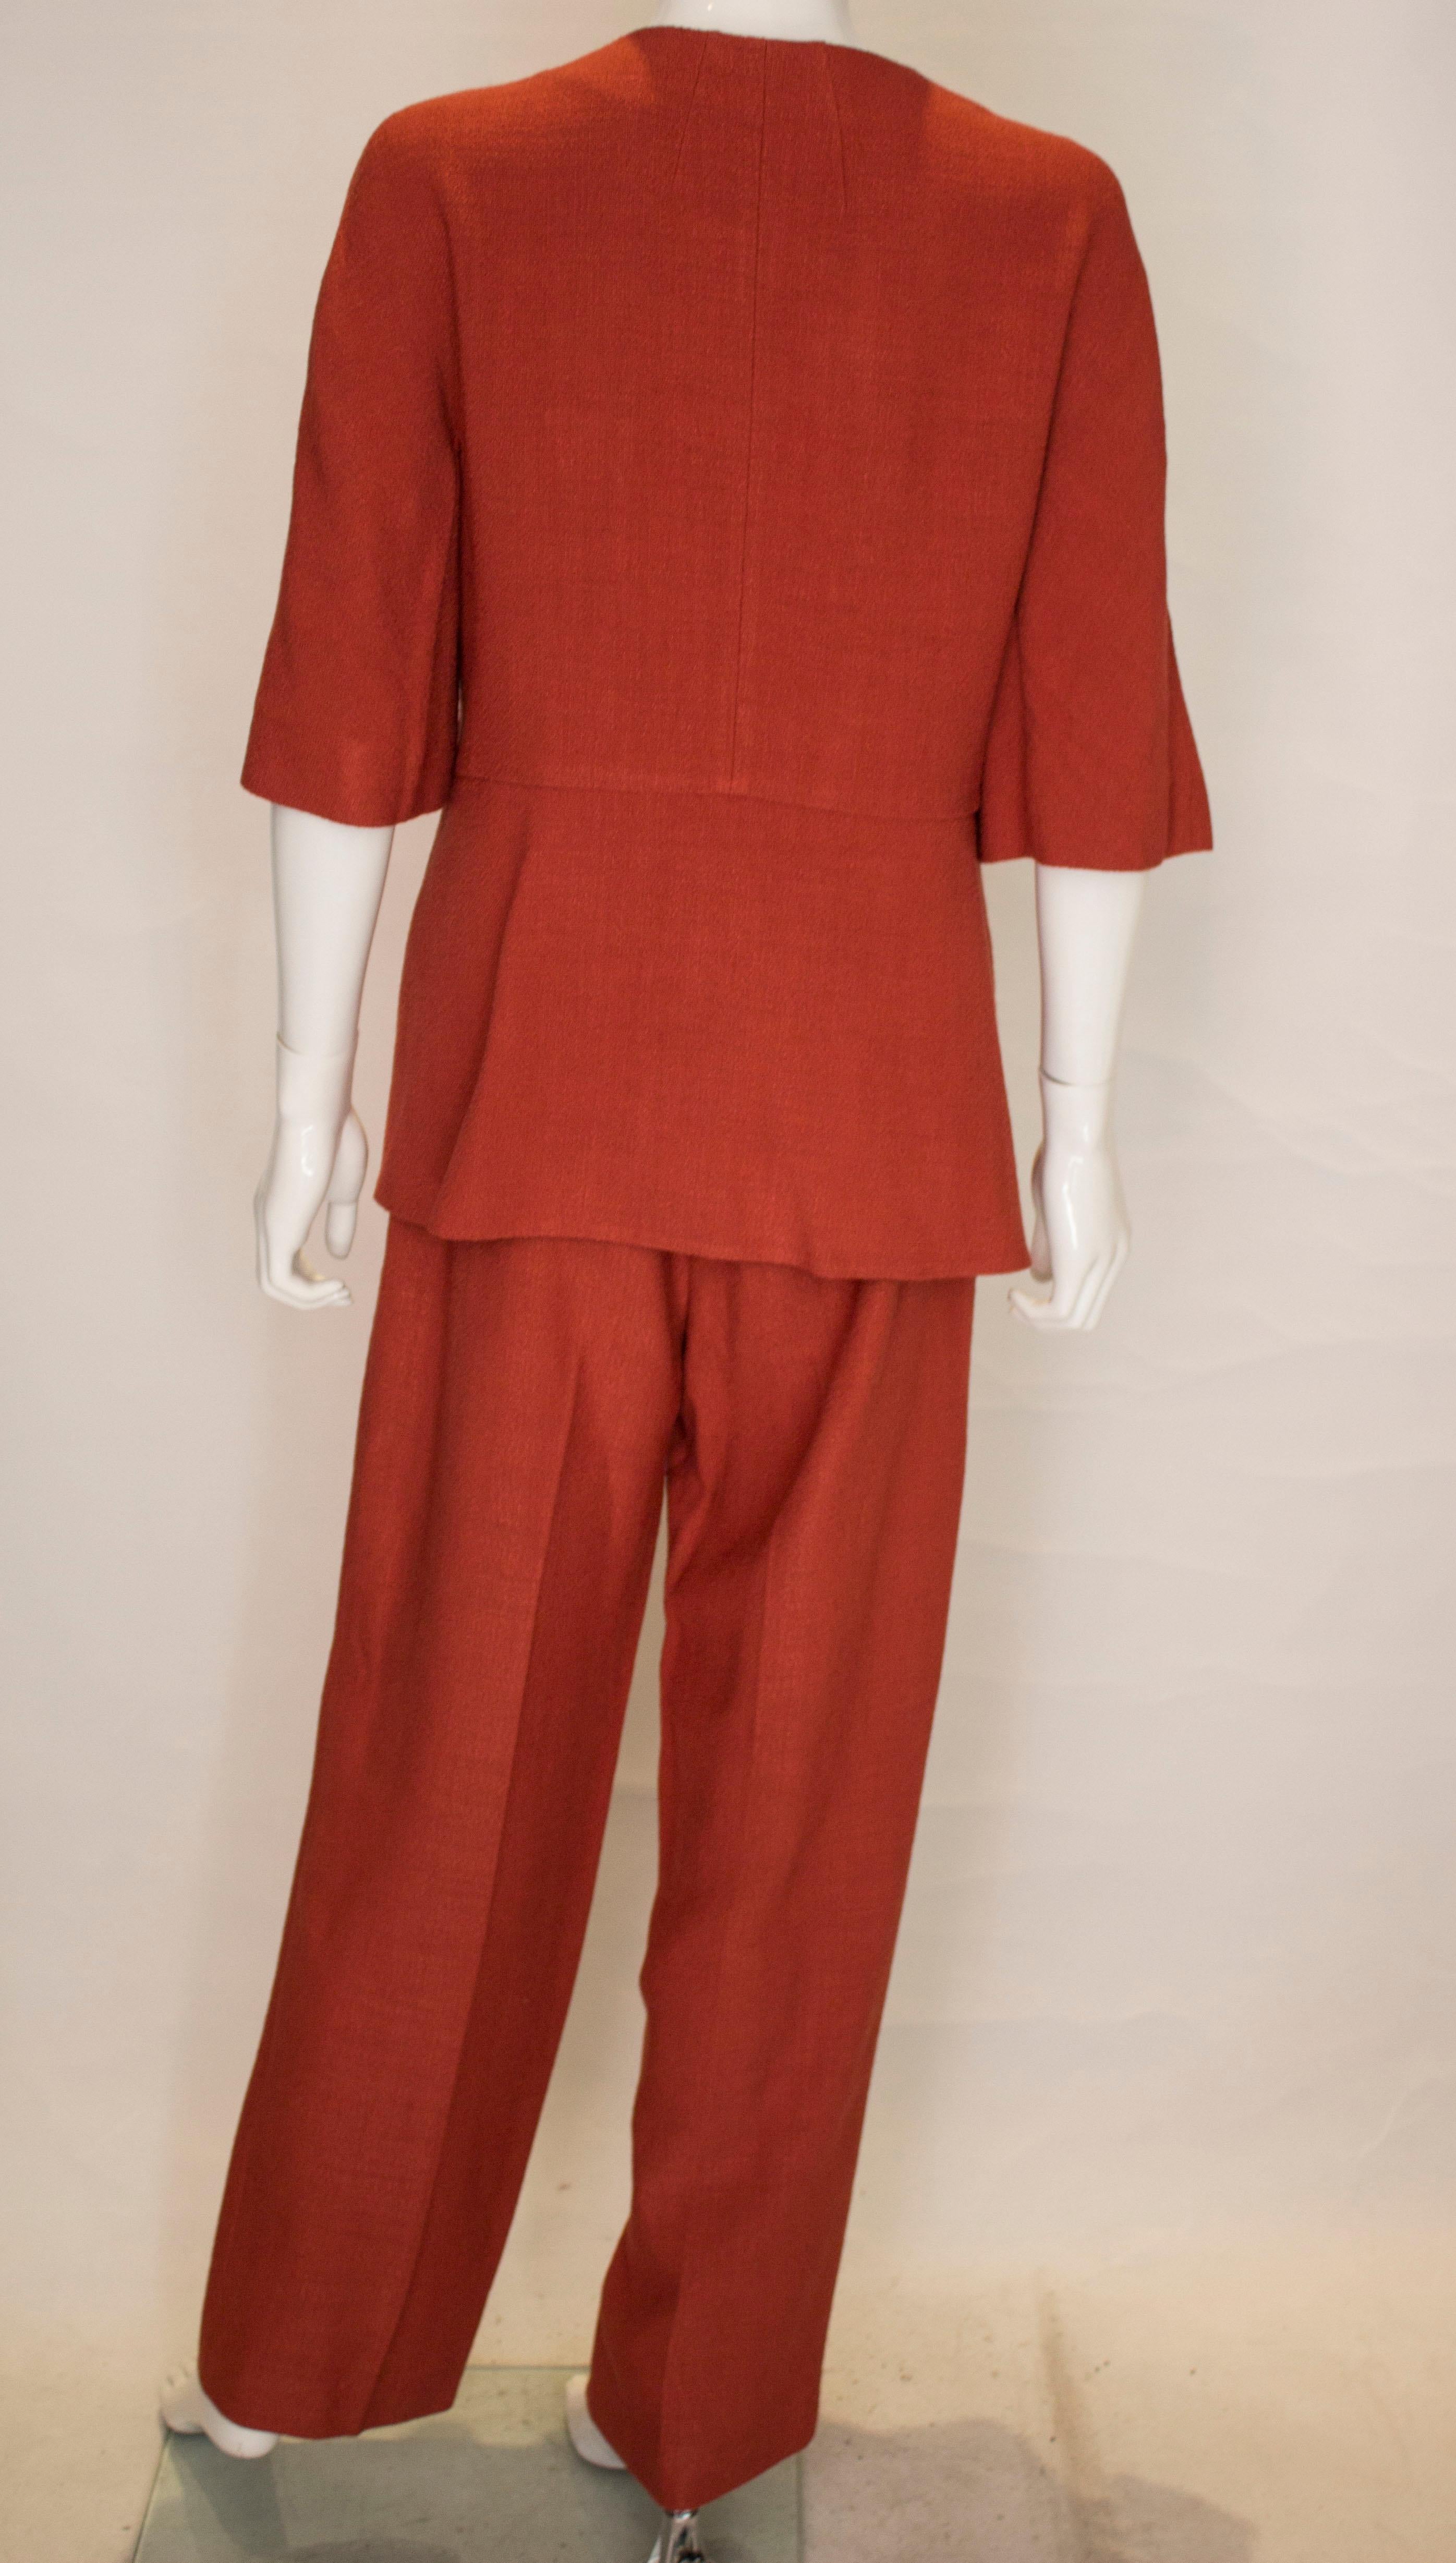 Marni Burnt Orange Trouser Suit In Good Condition For Sale In London, GB